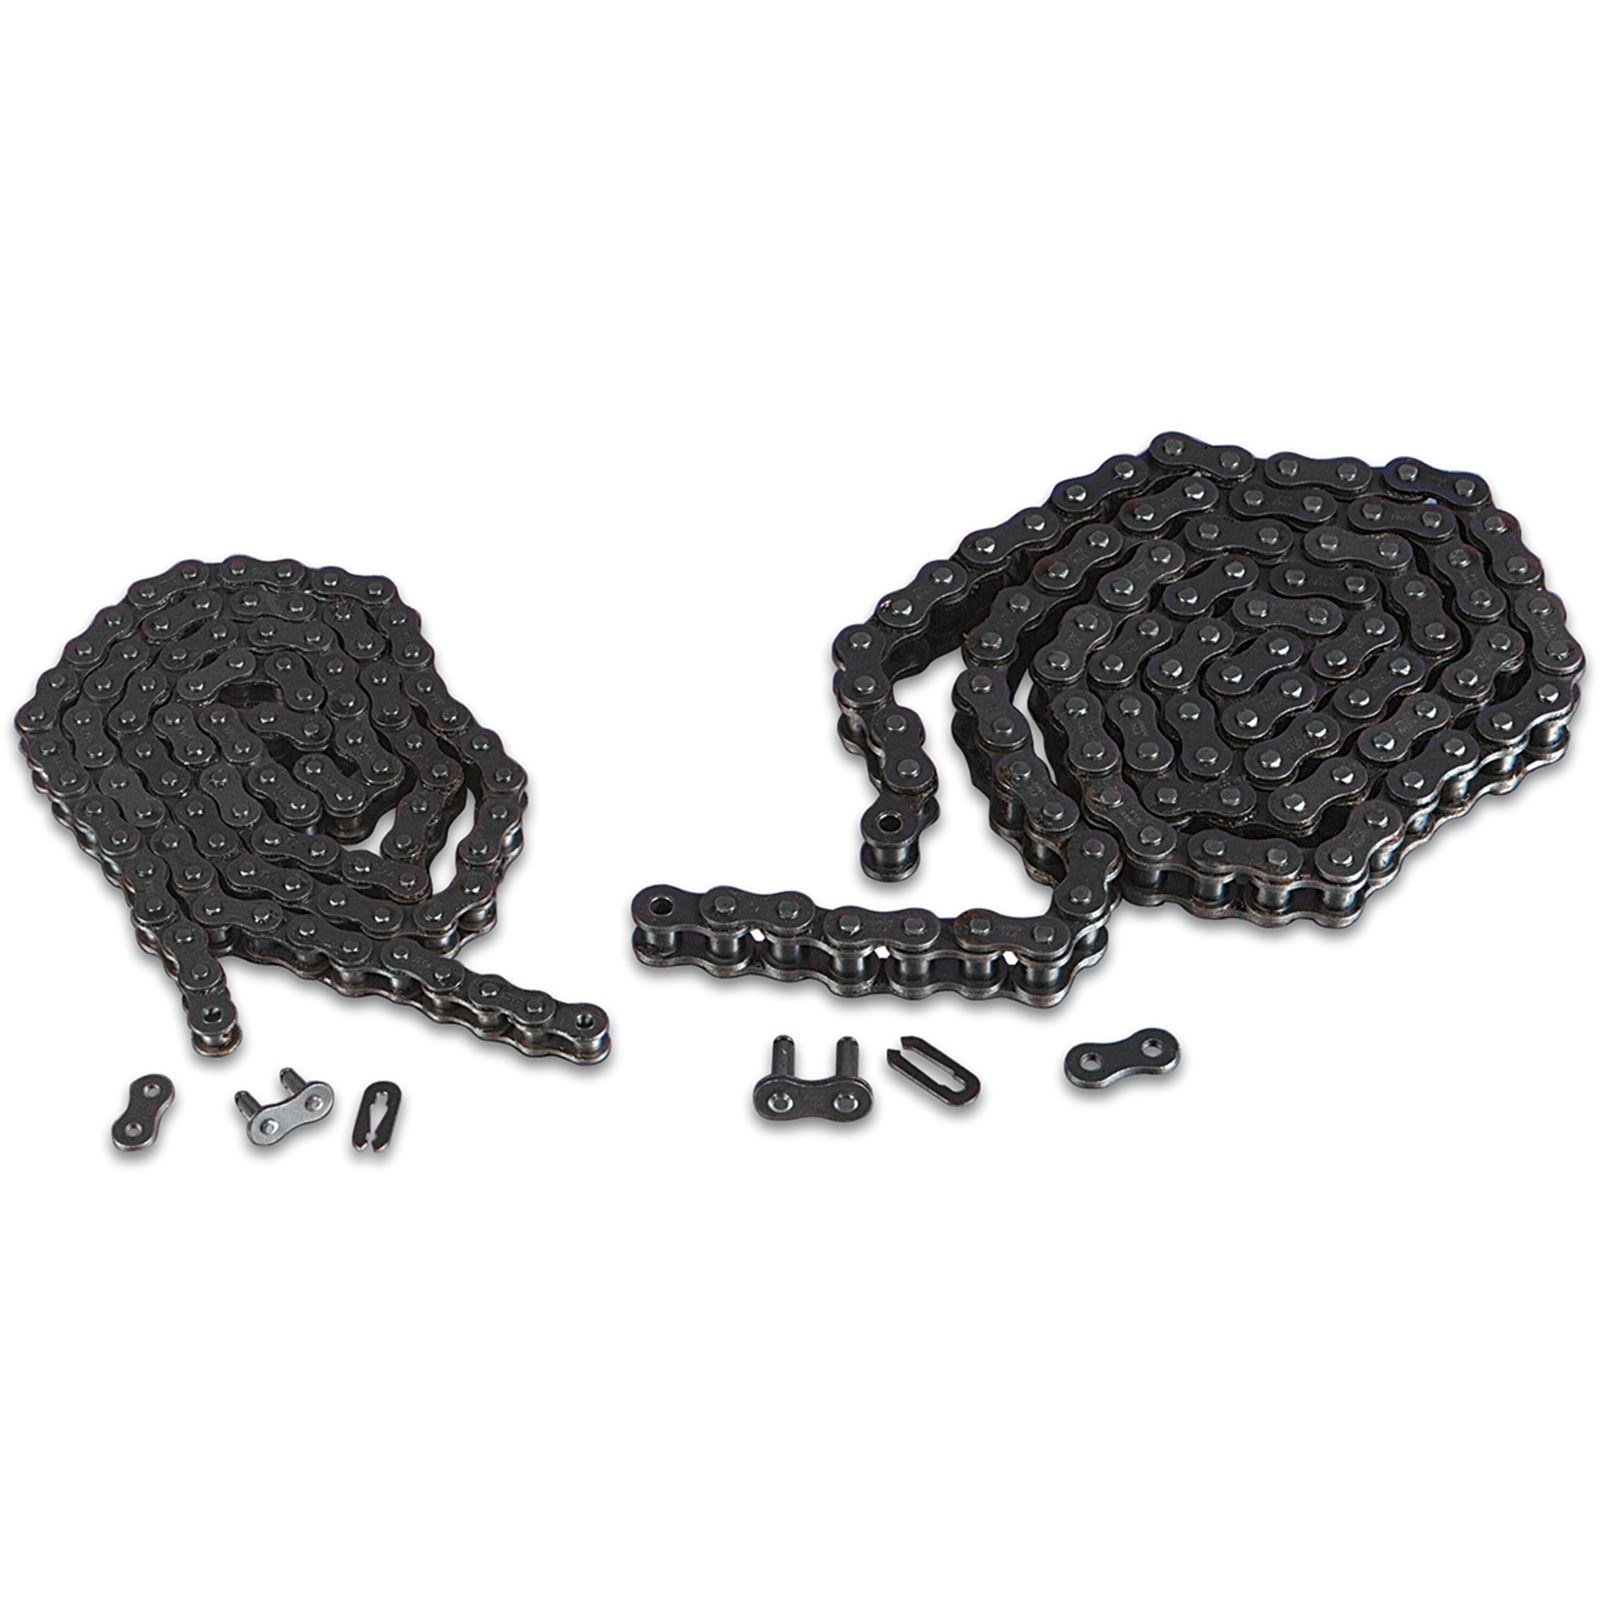 Parts Unlimited 530H - Drive Chain - 104 Links